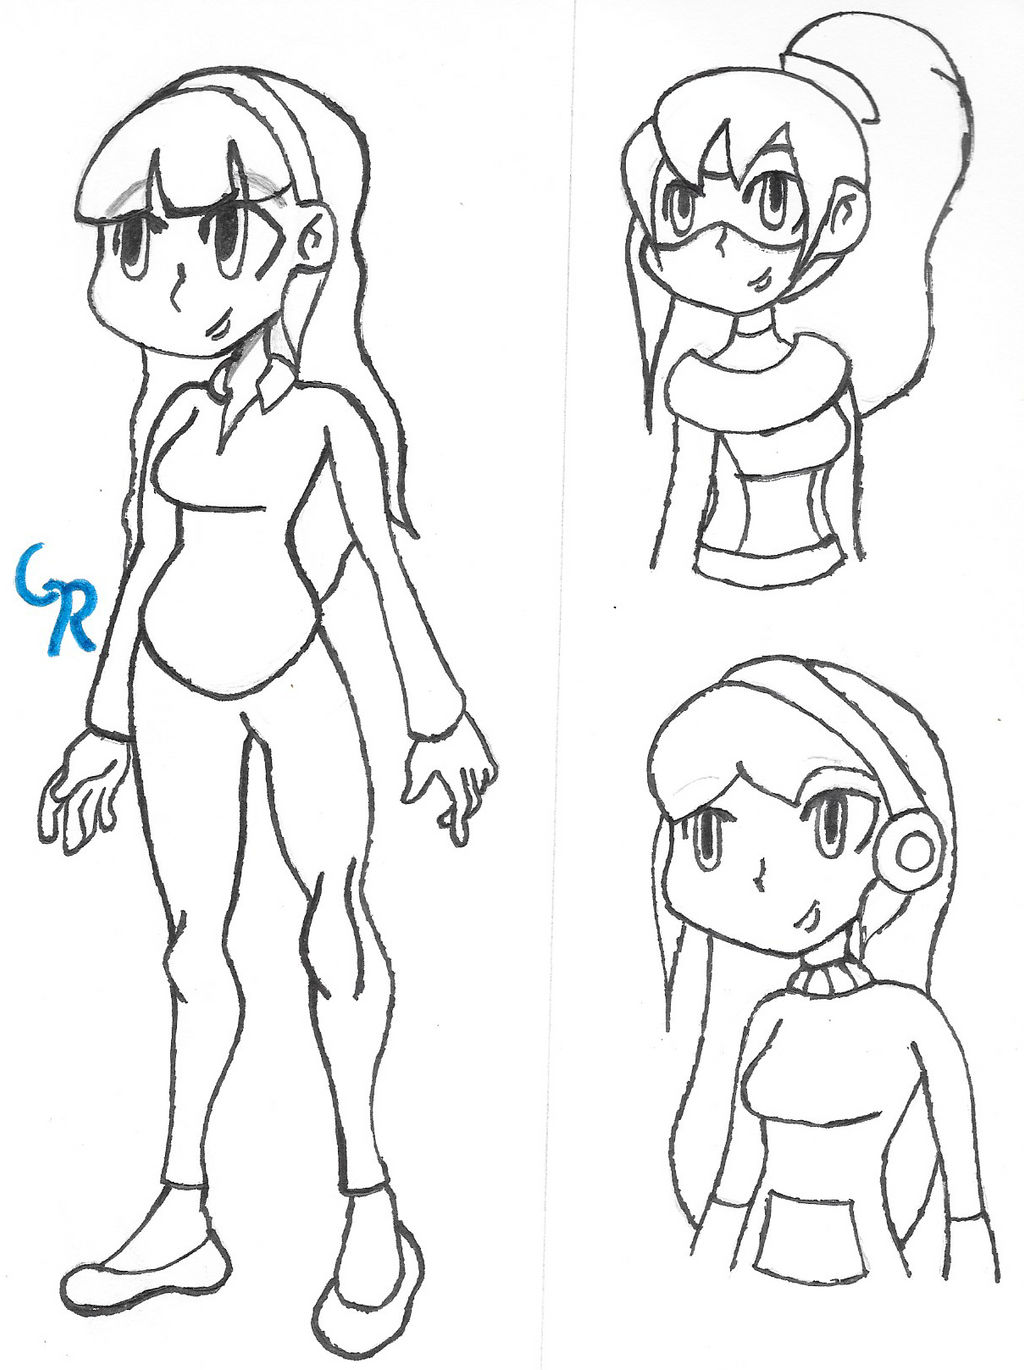 Trying Out the Skull Girls Style